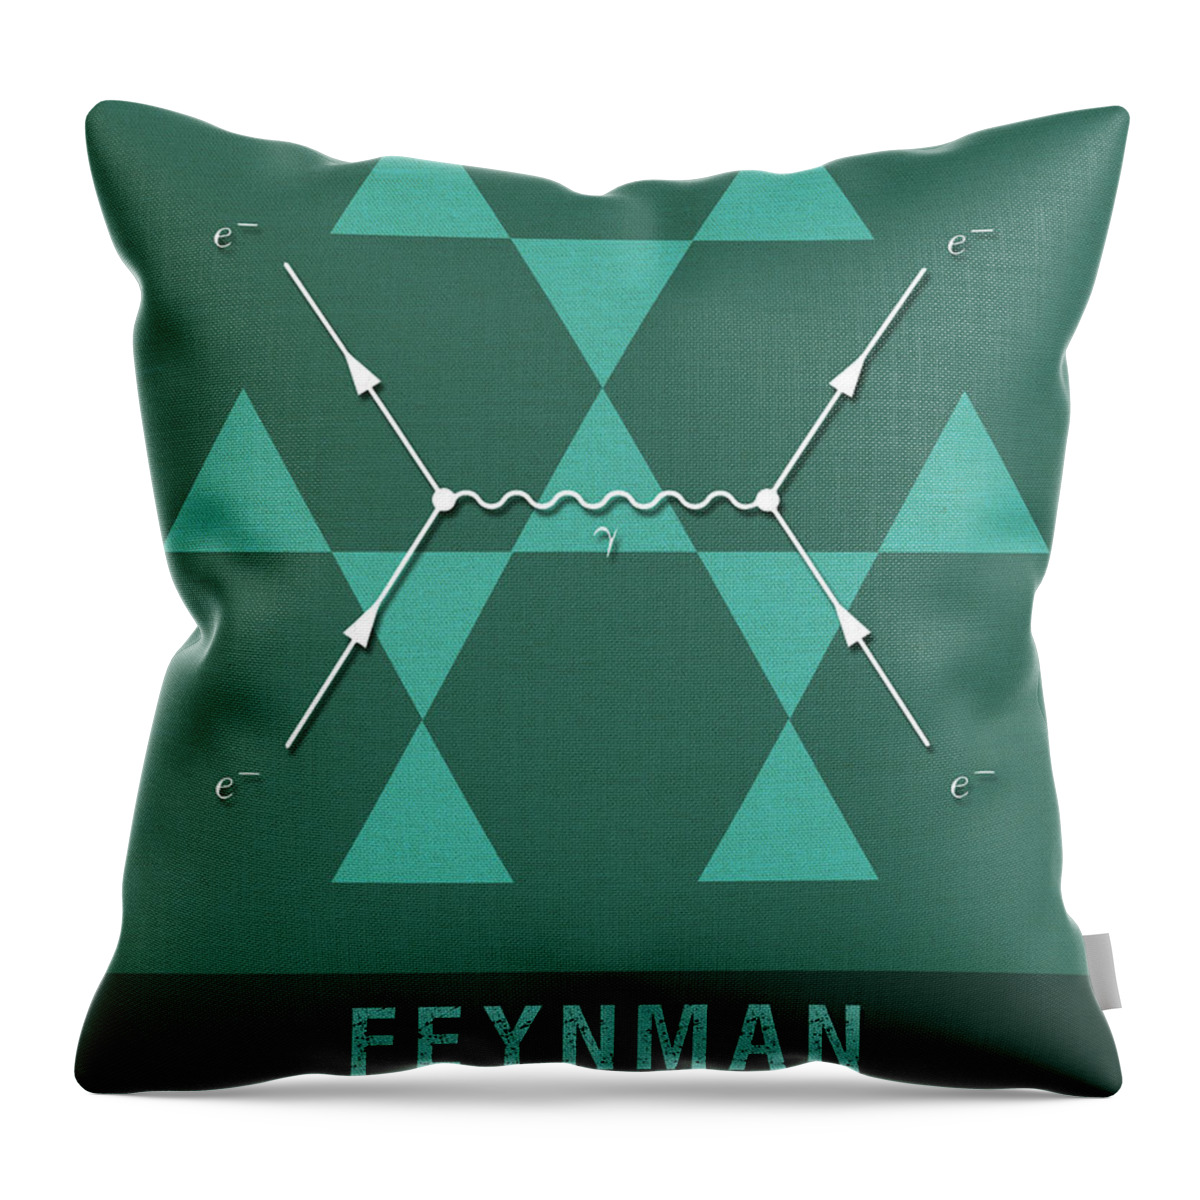 Feynman Throw Pillow featuring the mixed media Science Posters - Richard Feynman - Theoretical Physicist by Studio Grafiikka